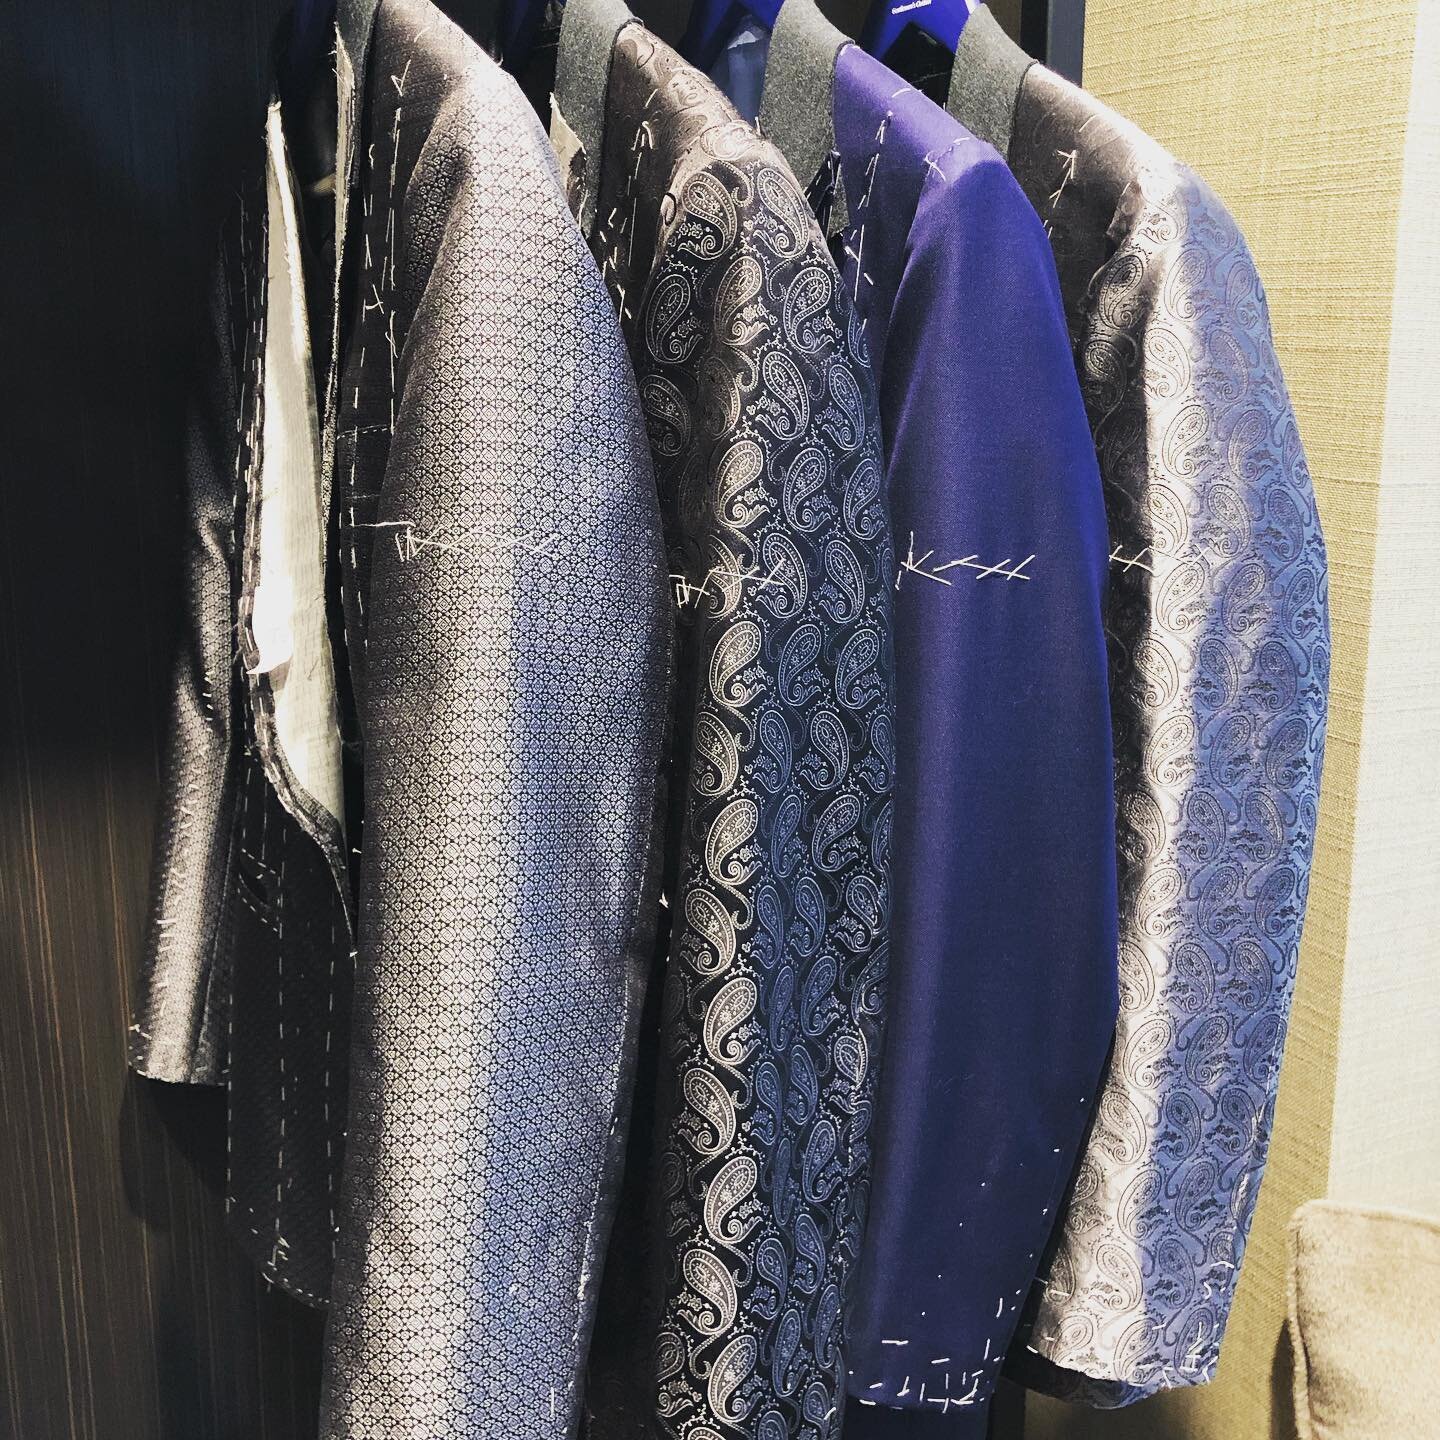 3 silk jackets and a tails. Getting ready for a splendid wedding in Morocco! #bespokesuit #sartorial #handmade #tailoring #shawllapel #luxurylifestyle